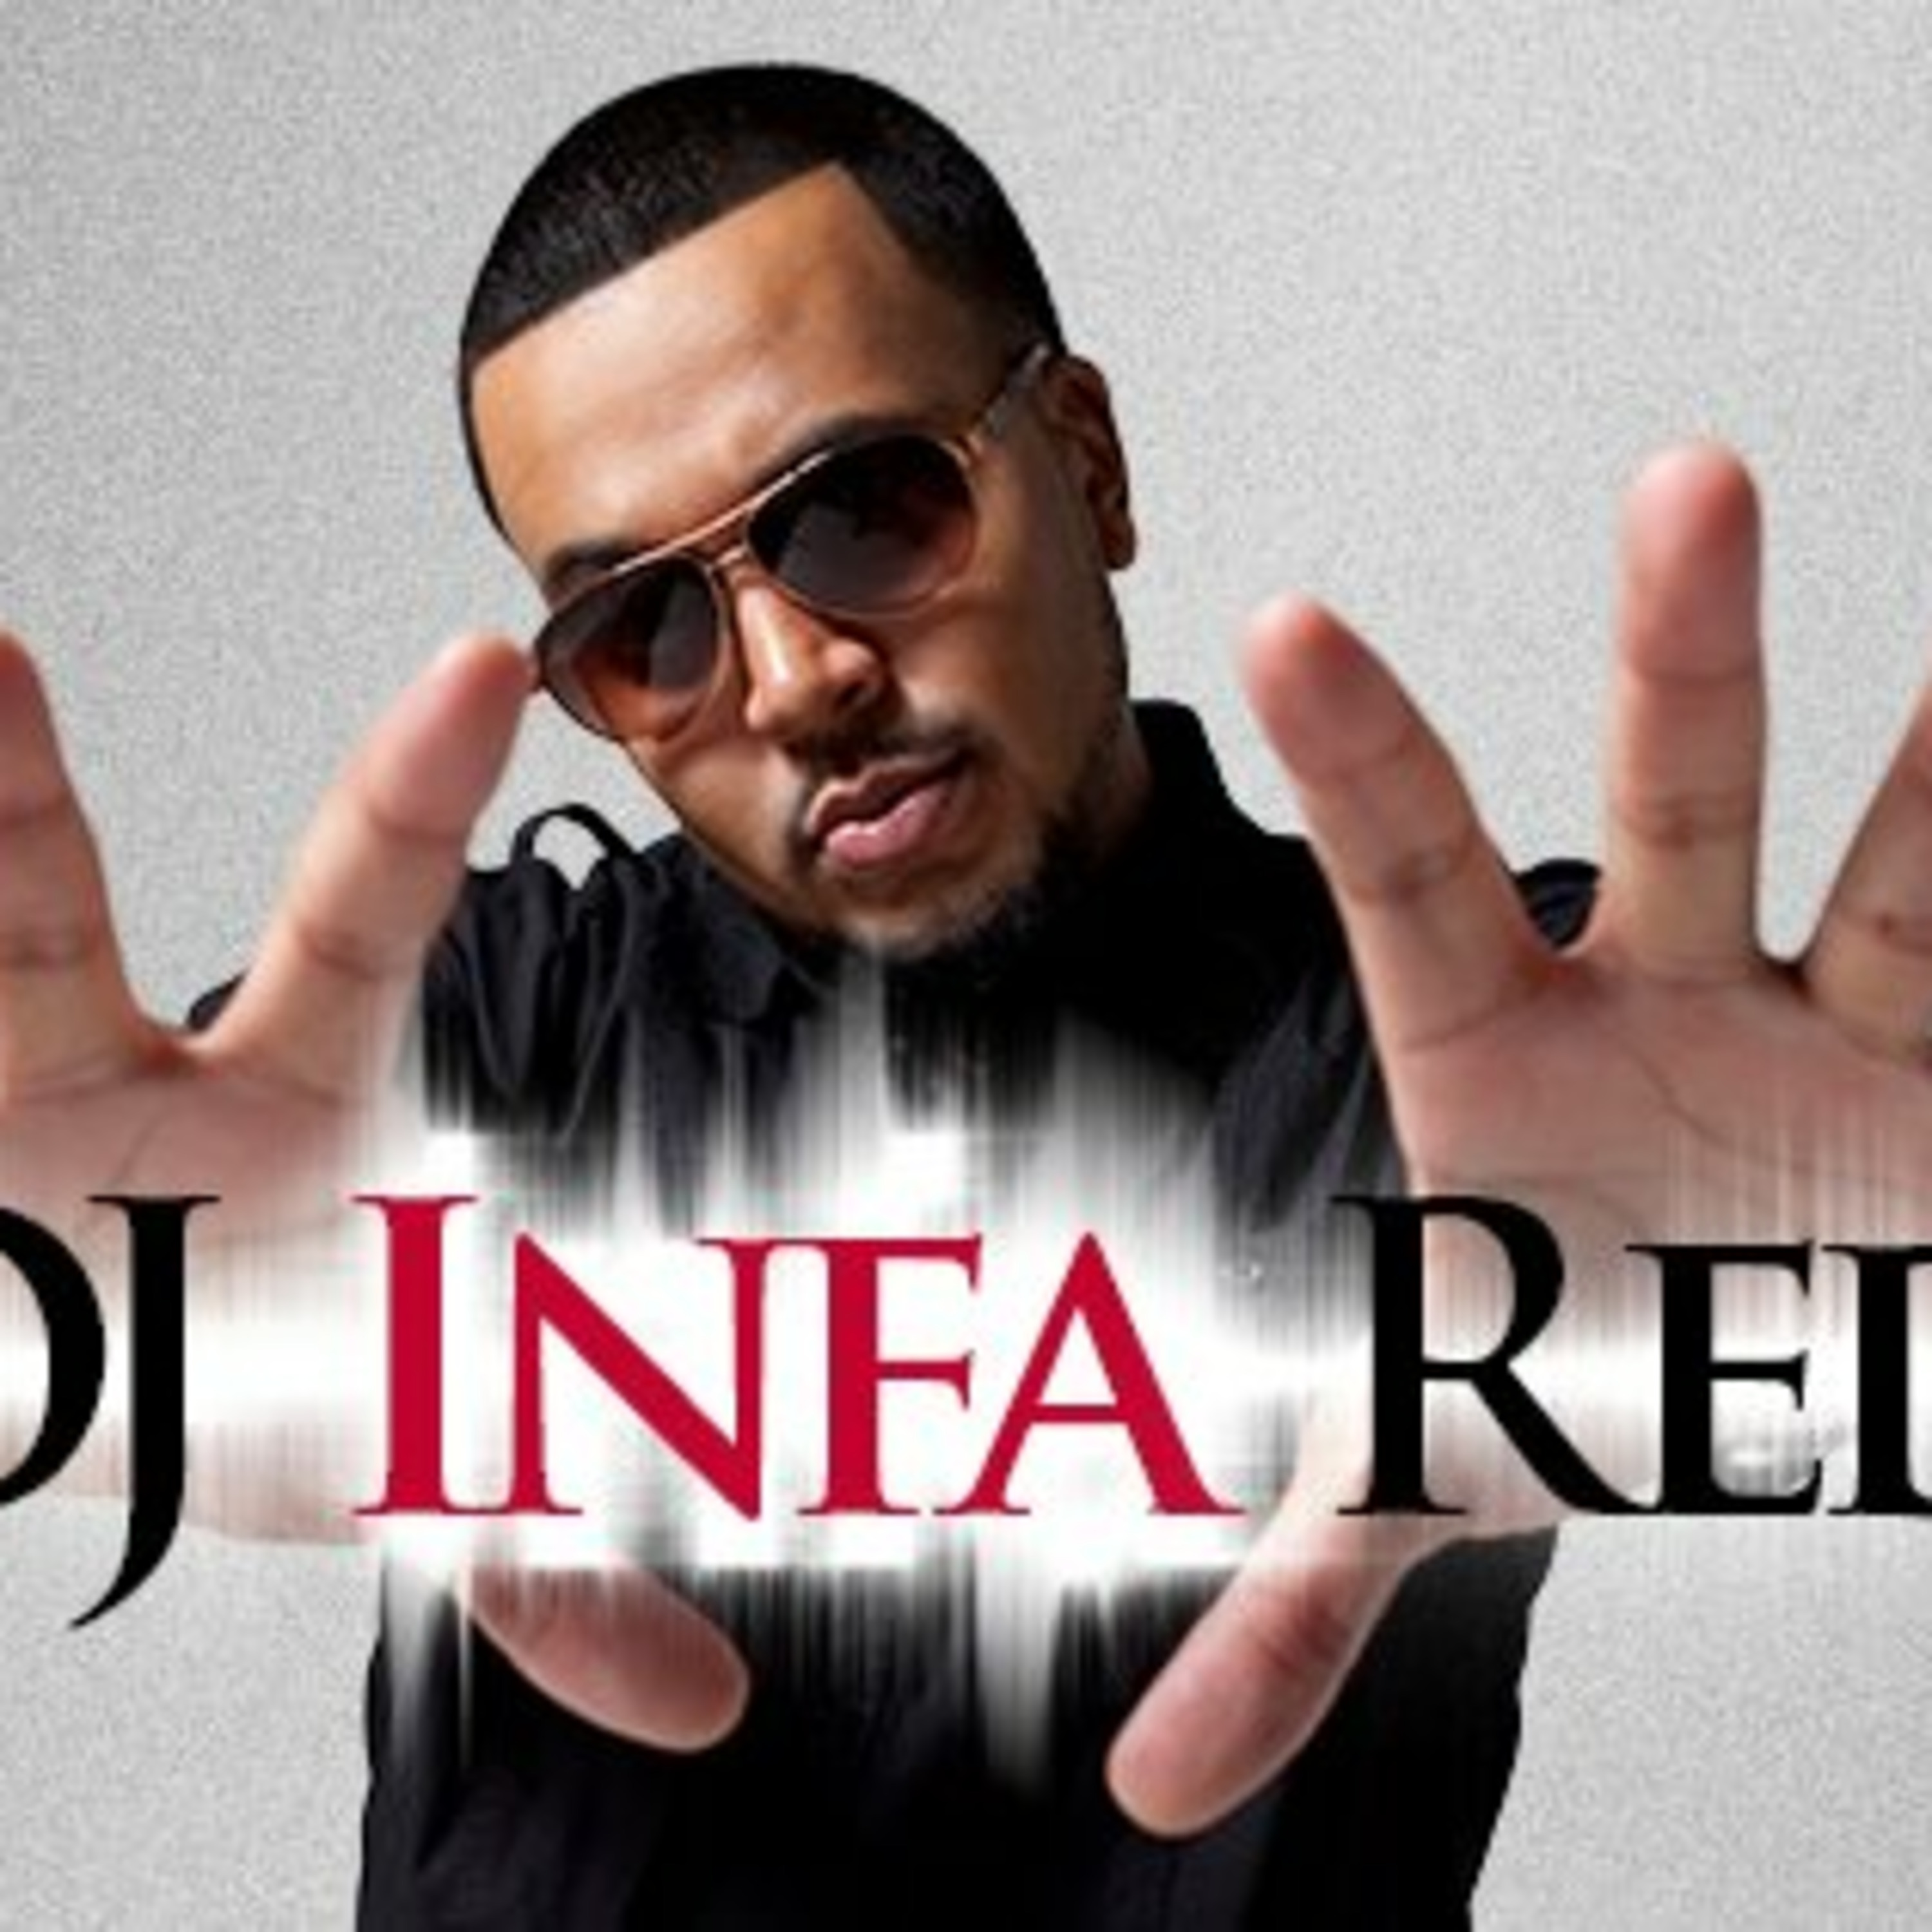 DJ INFA RED - THE CODE